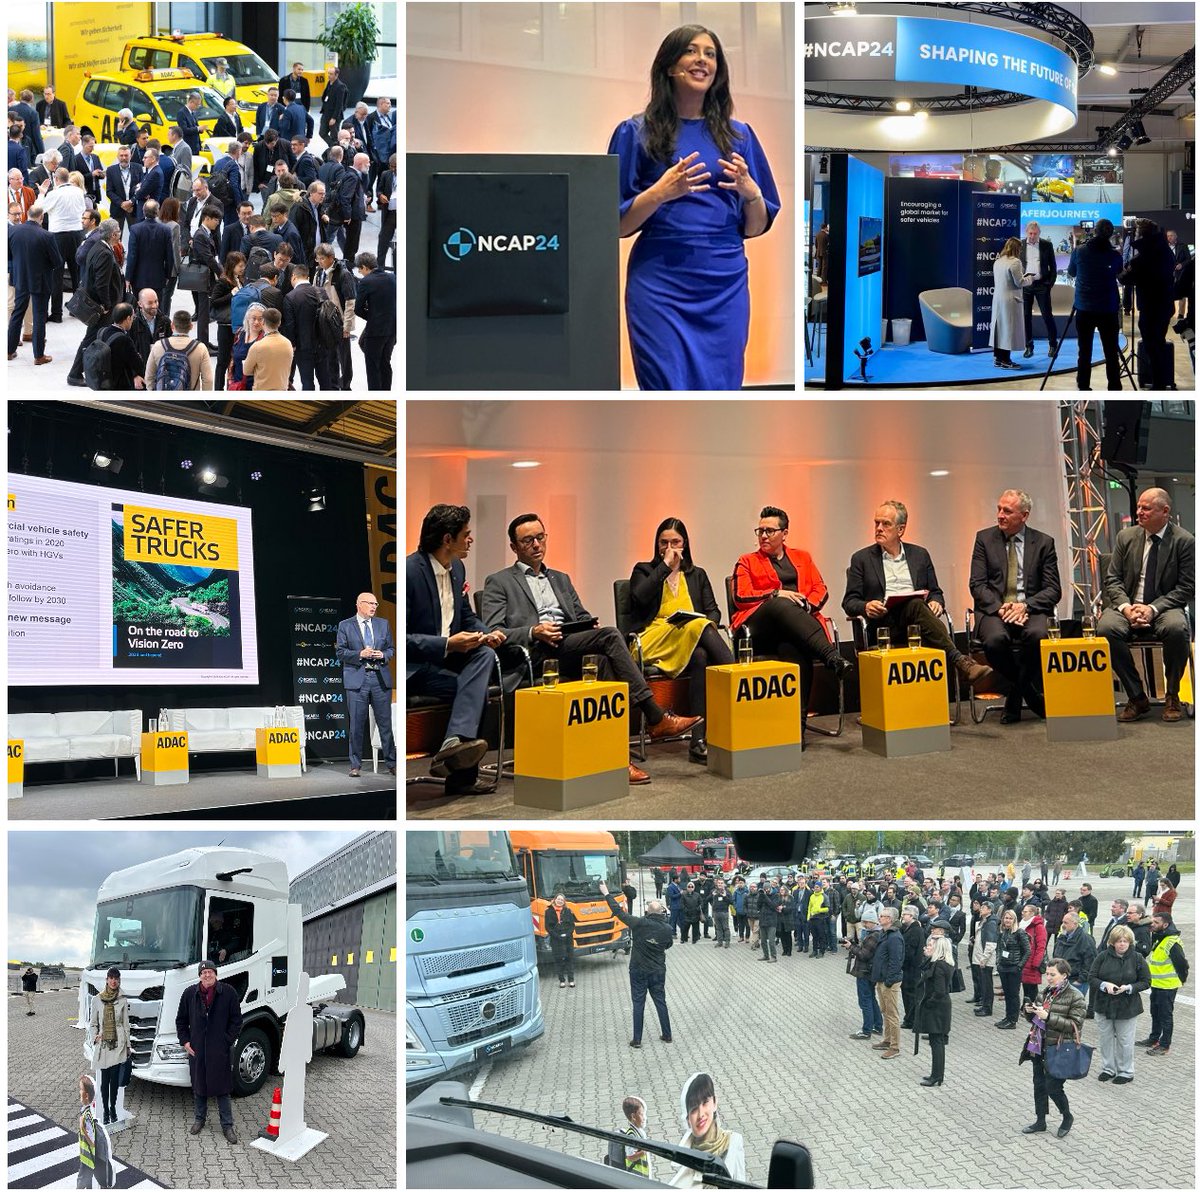 Many thanks to our co-hosts @EuroNCAP & @ADAC helping to make #NCAP24 such a success. 423 delegates from 32 countries meeting to advance vehicle safety with new truck rating system taking centre stage together with @NaranMeera who spoke so movingly of why this matters so much.